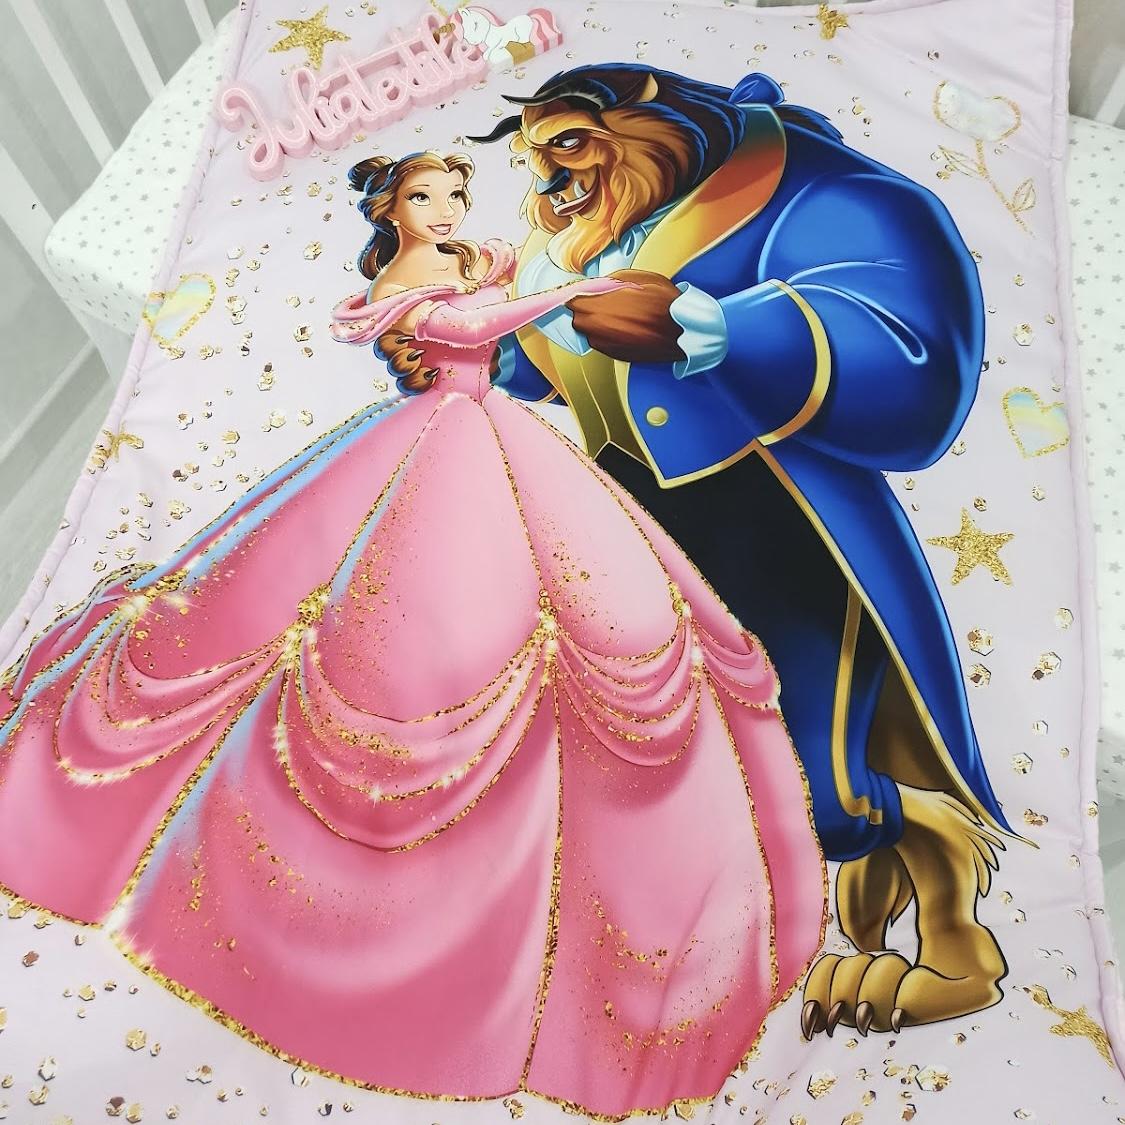 Reversible blanket with rose gold Beauty and the Beast print